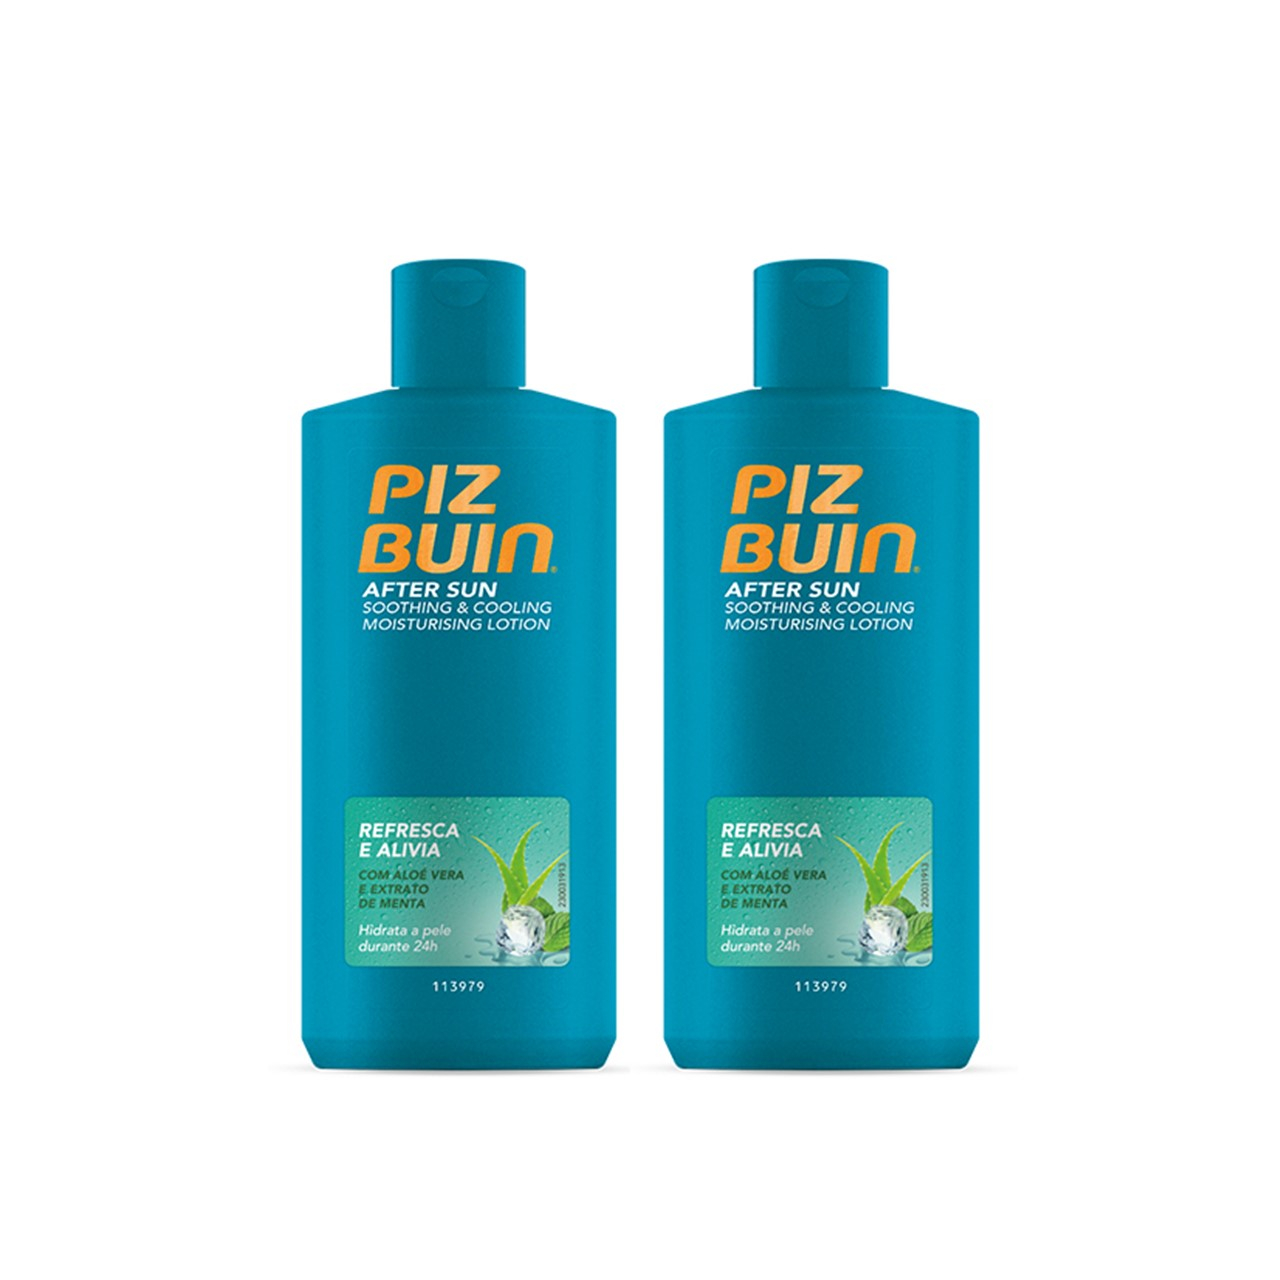 Piz Buin After Sun Soothing & Cooling Moisturizing Lotion 200ml x2 (2x6.76fl oz)